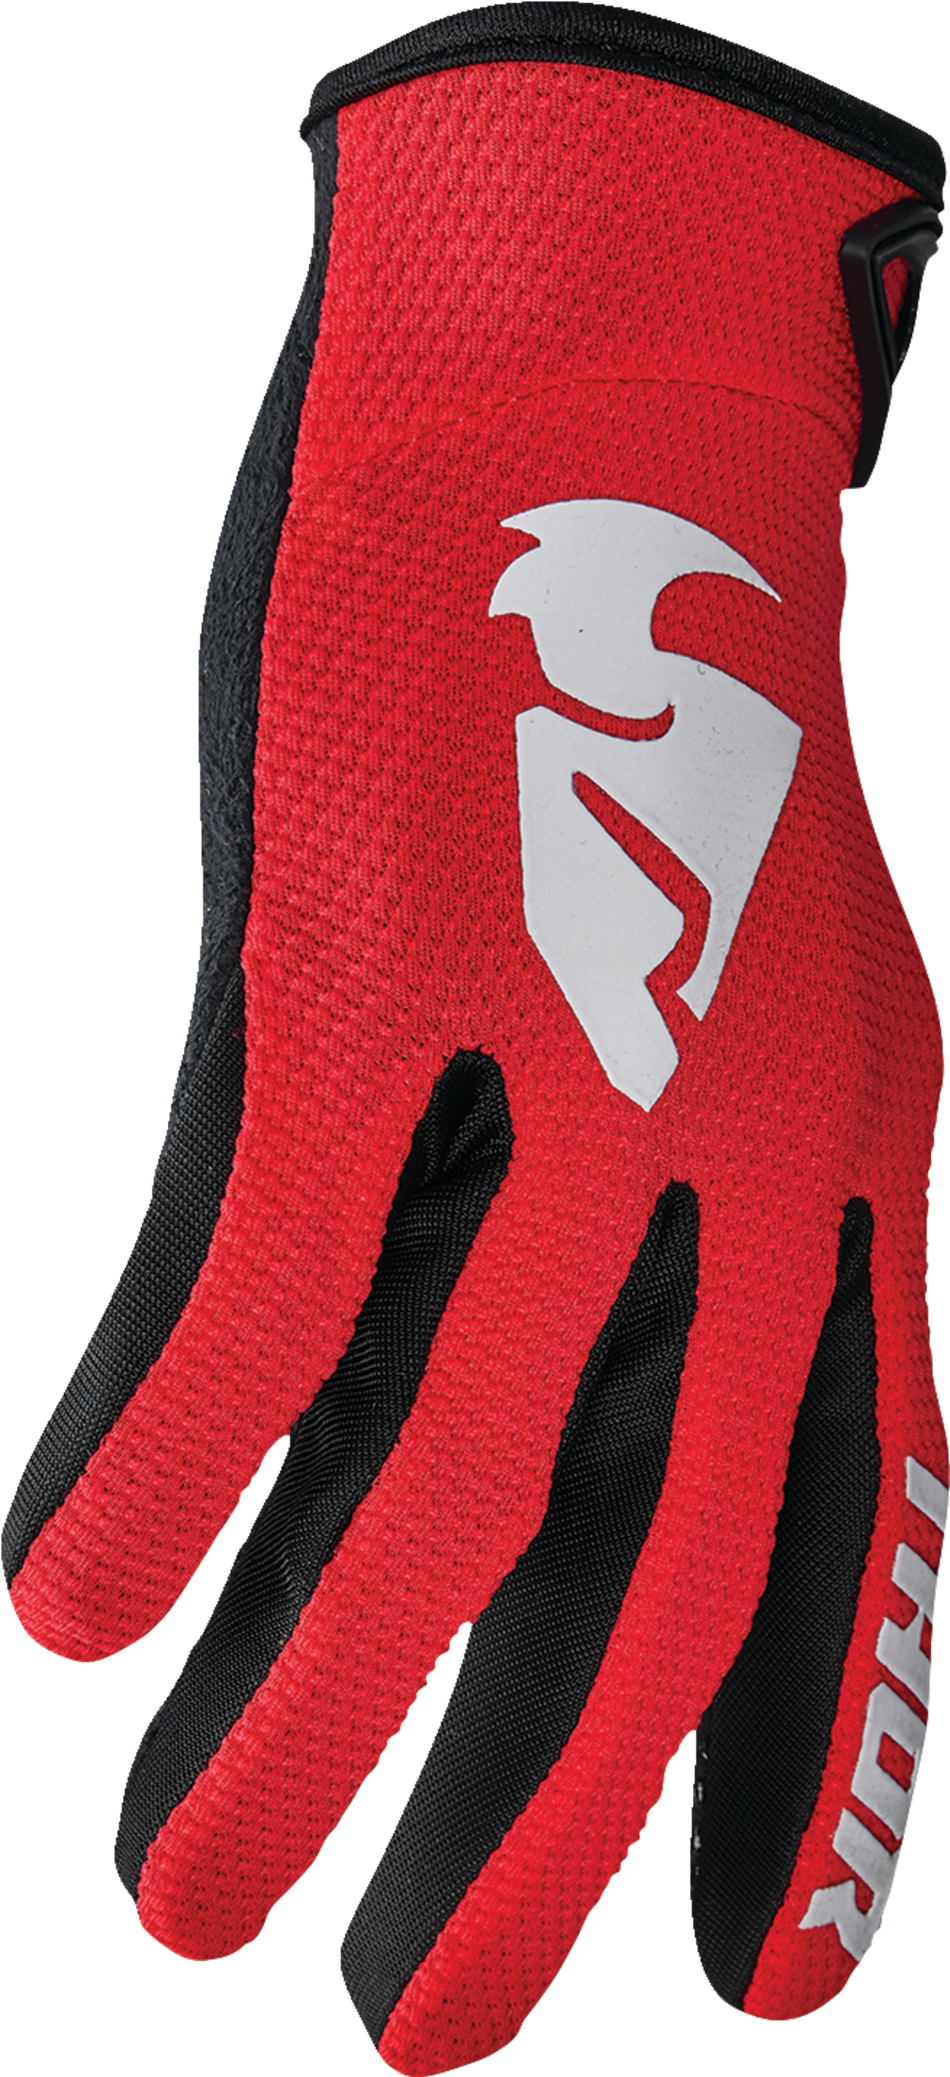 THOR Sector Gloves - Red/White - XS 3330-7267